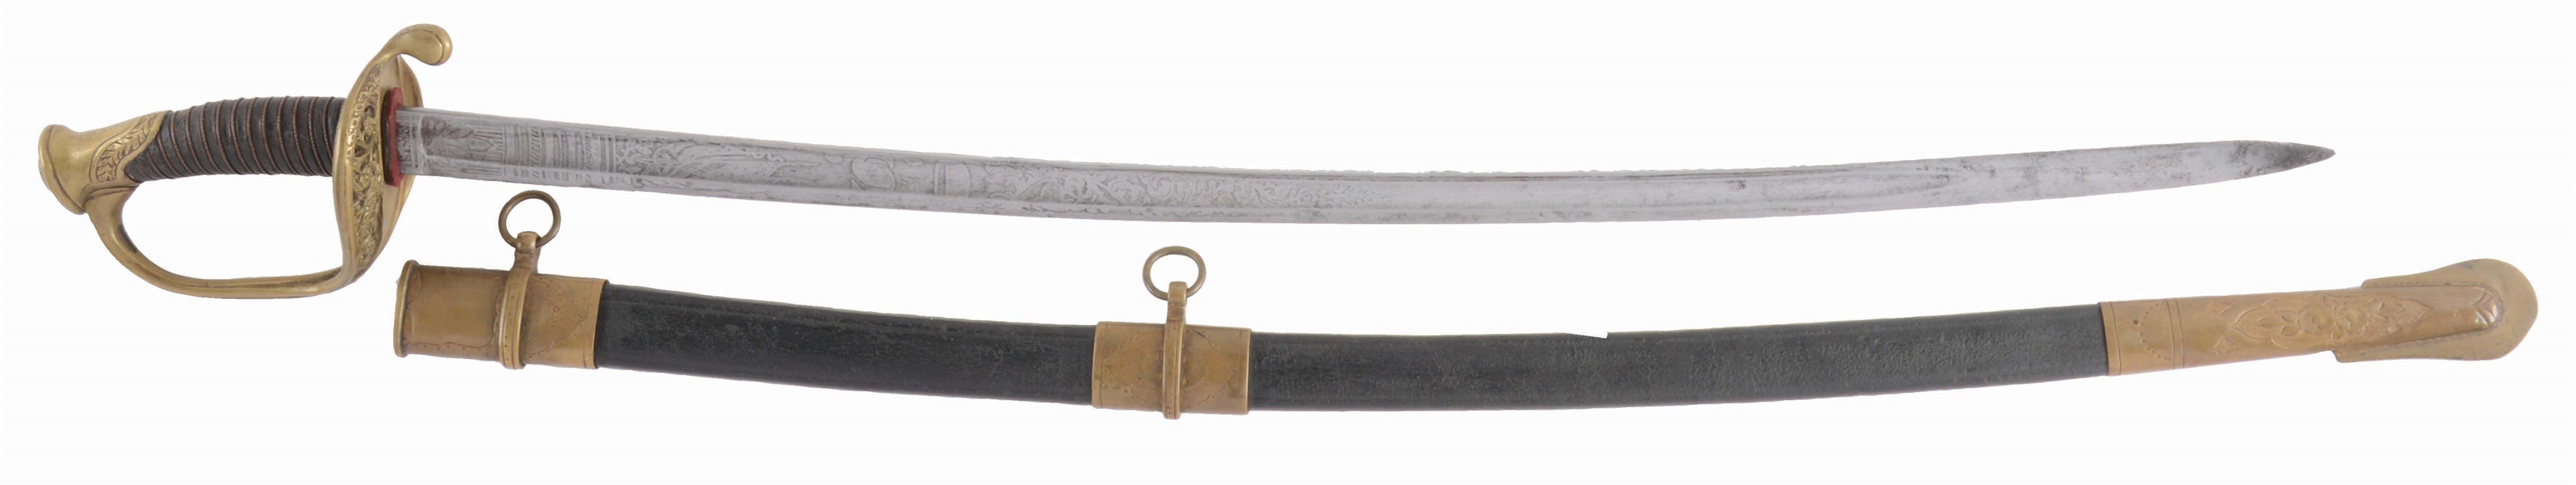 WELL IDENTIFIED CIVIL WAR 1850 FIELD OFFICERS SABER WITH EXTREMELY GOOD CIVIL WAR HISTORY.